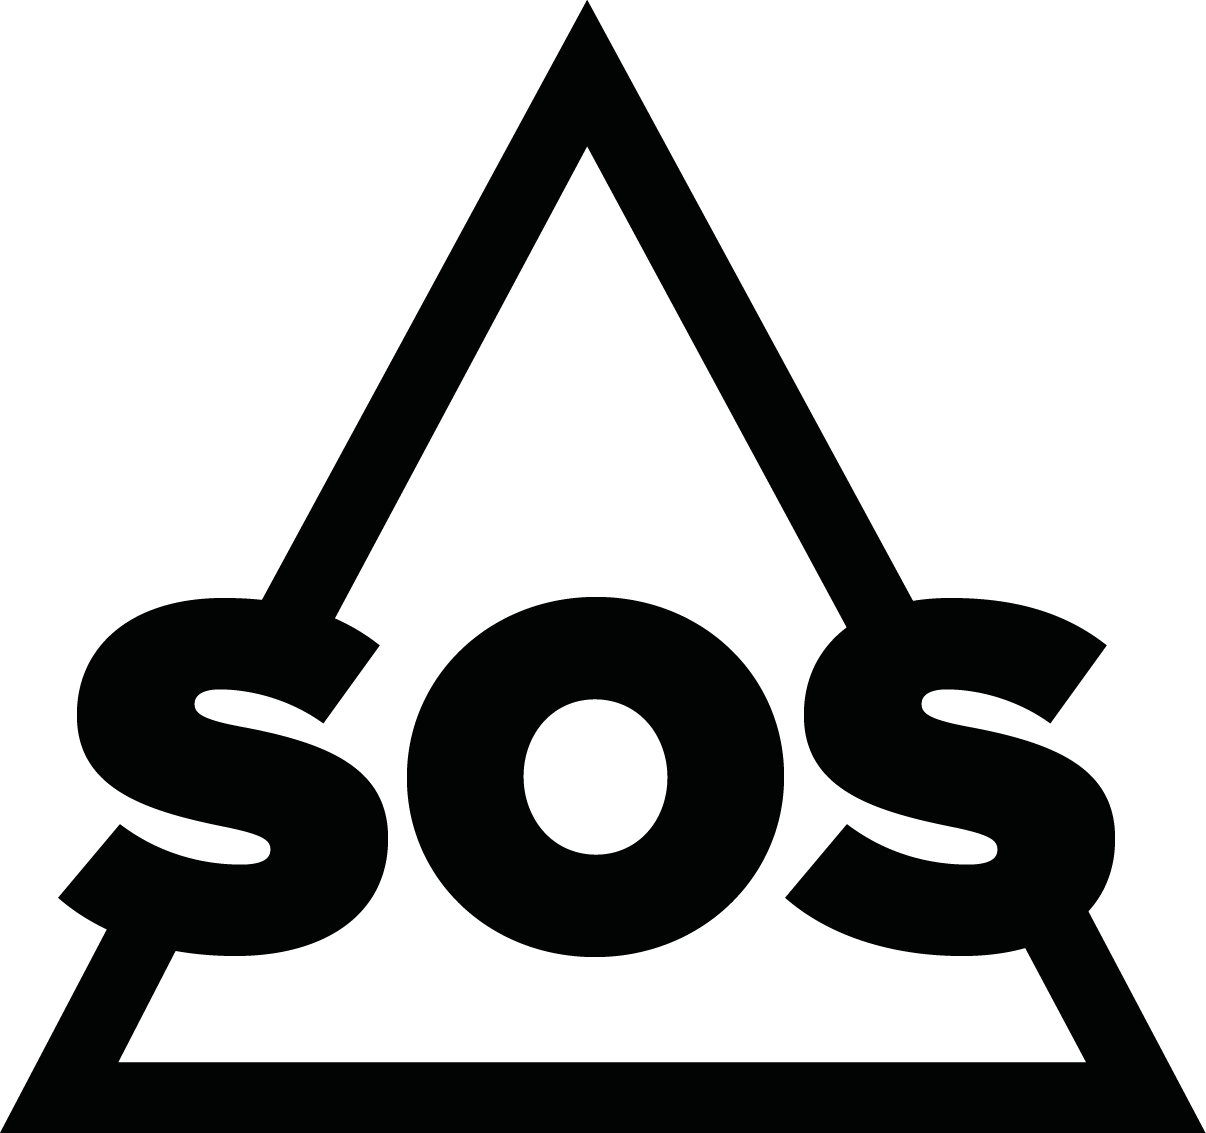 Black and White Triangles Logo - SOS Of Sweden. Fashionable Winter and Ski Wear